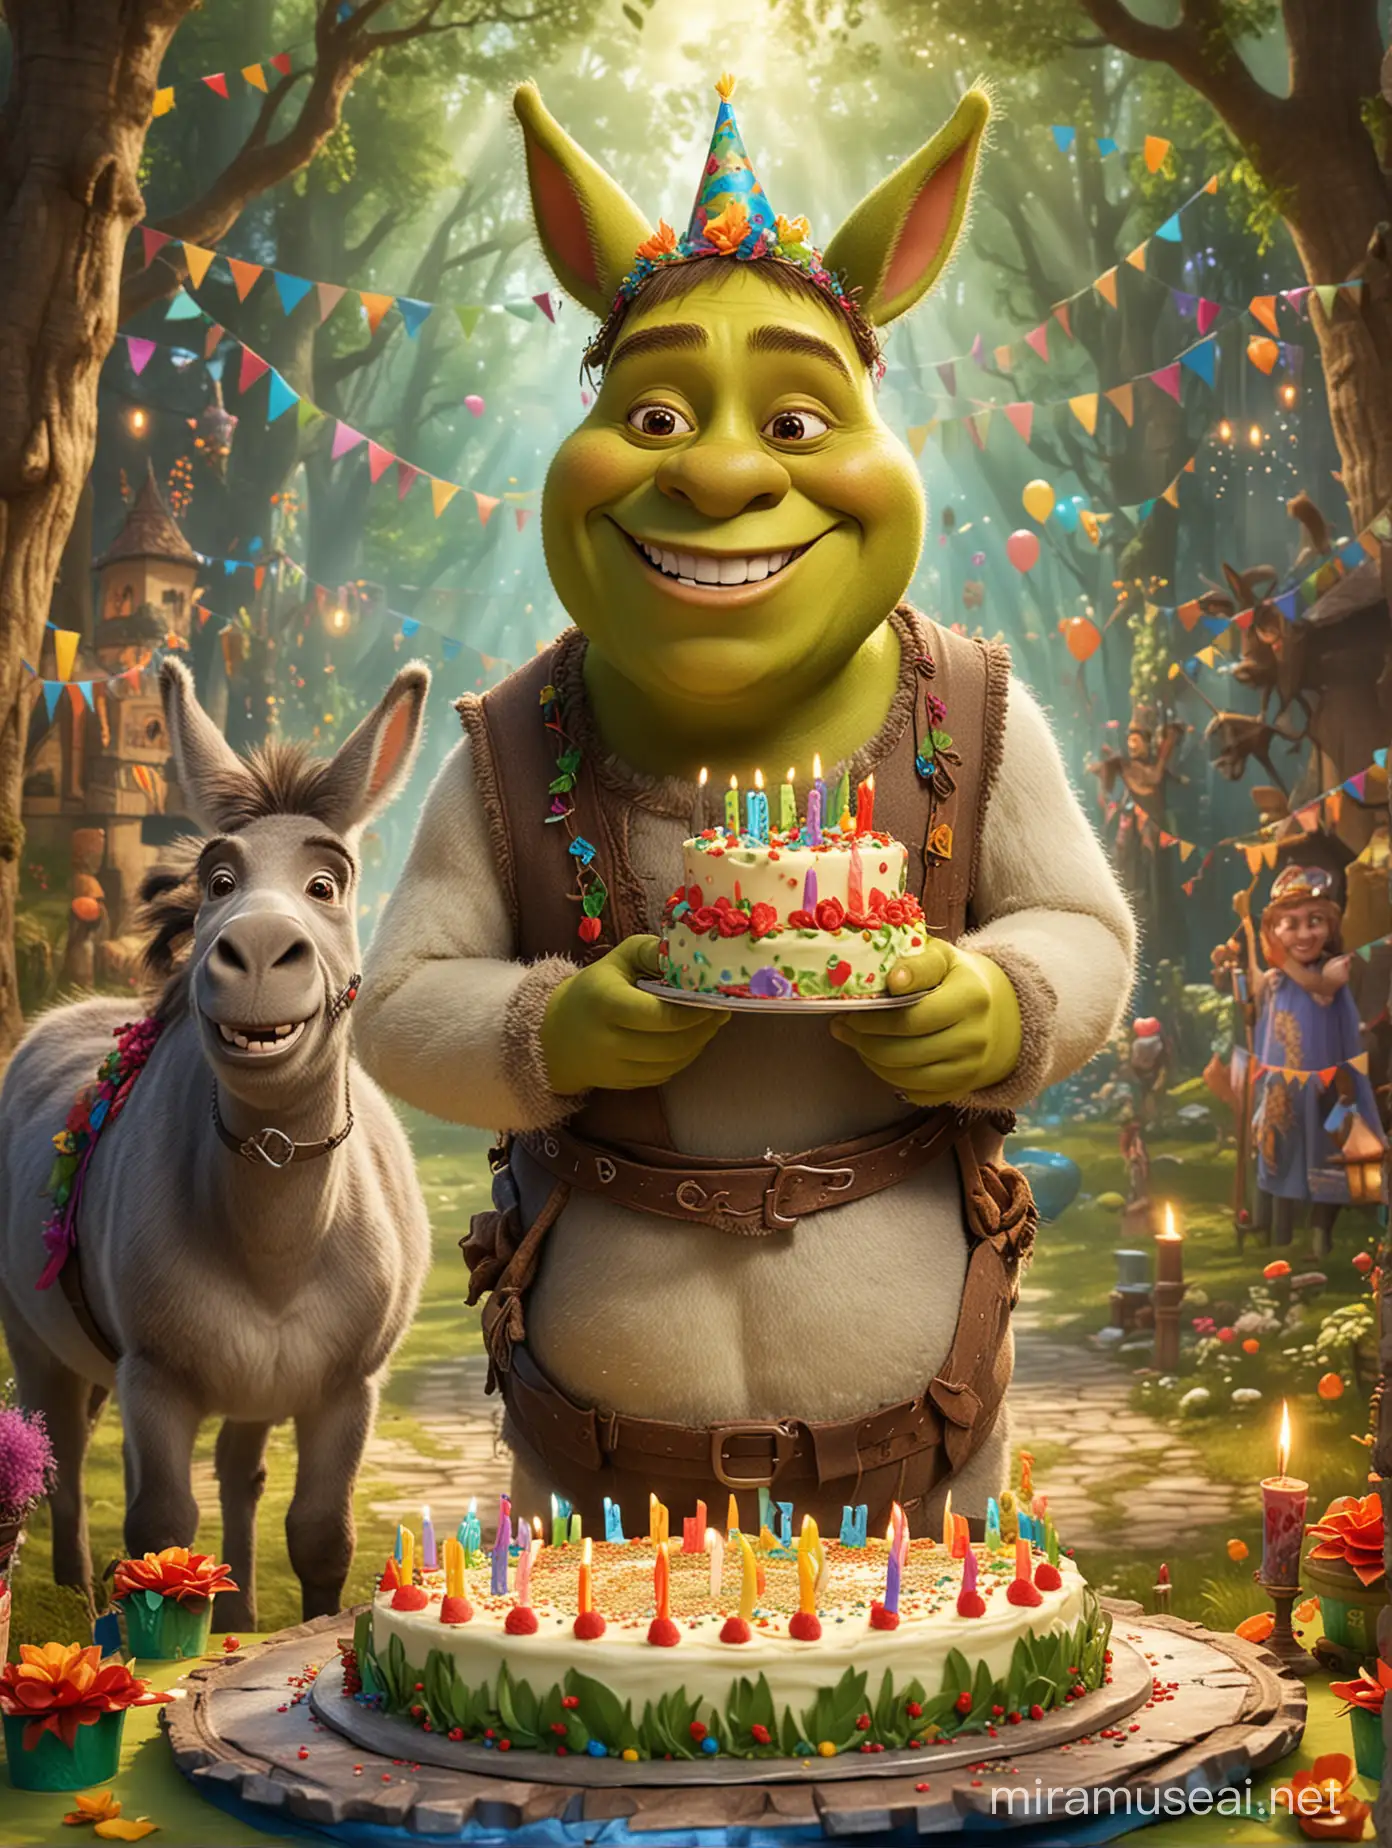 Shrek is smiling and holding a birthday cake, with a donkey in the background singing. The setting is colorful and festive, resembling a fairy-tale forest, in portrait orientation for an A5 card. On the cake is a name 'For Ulyana'
